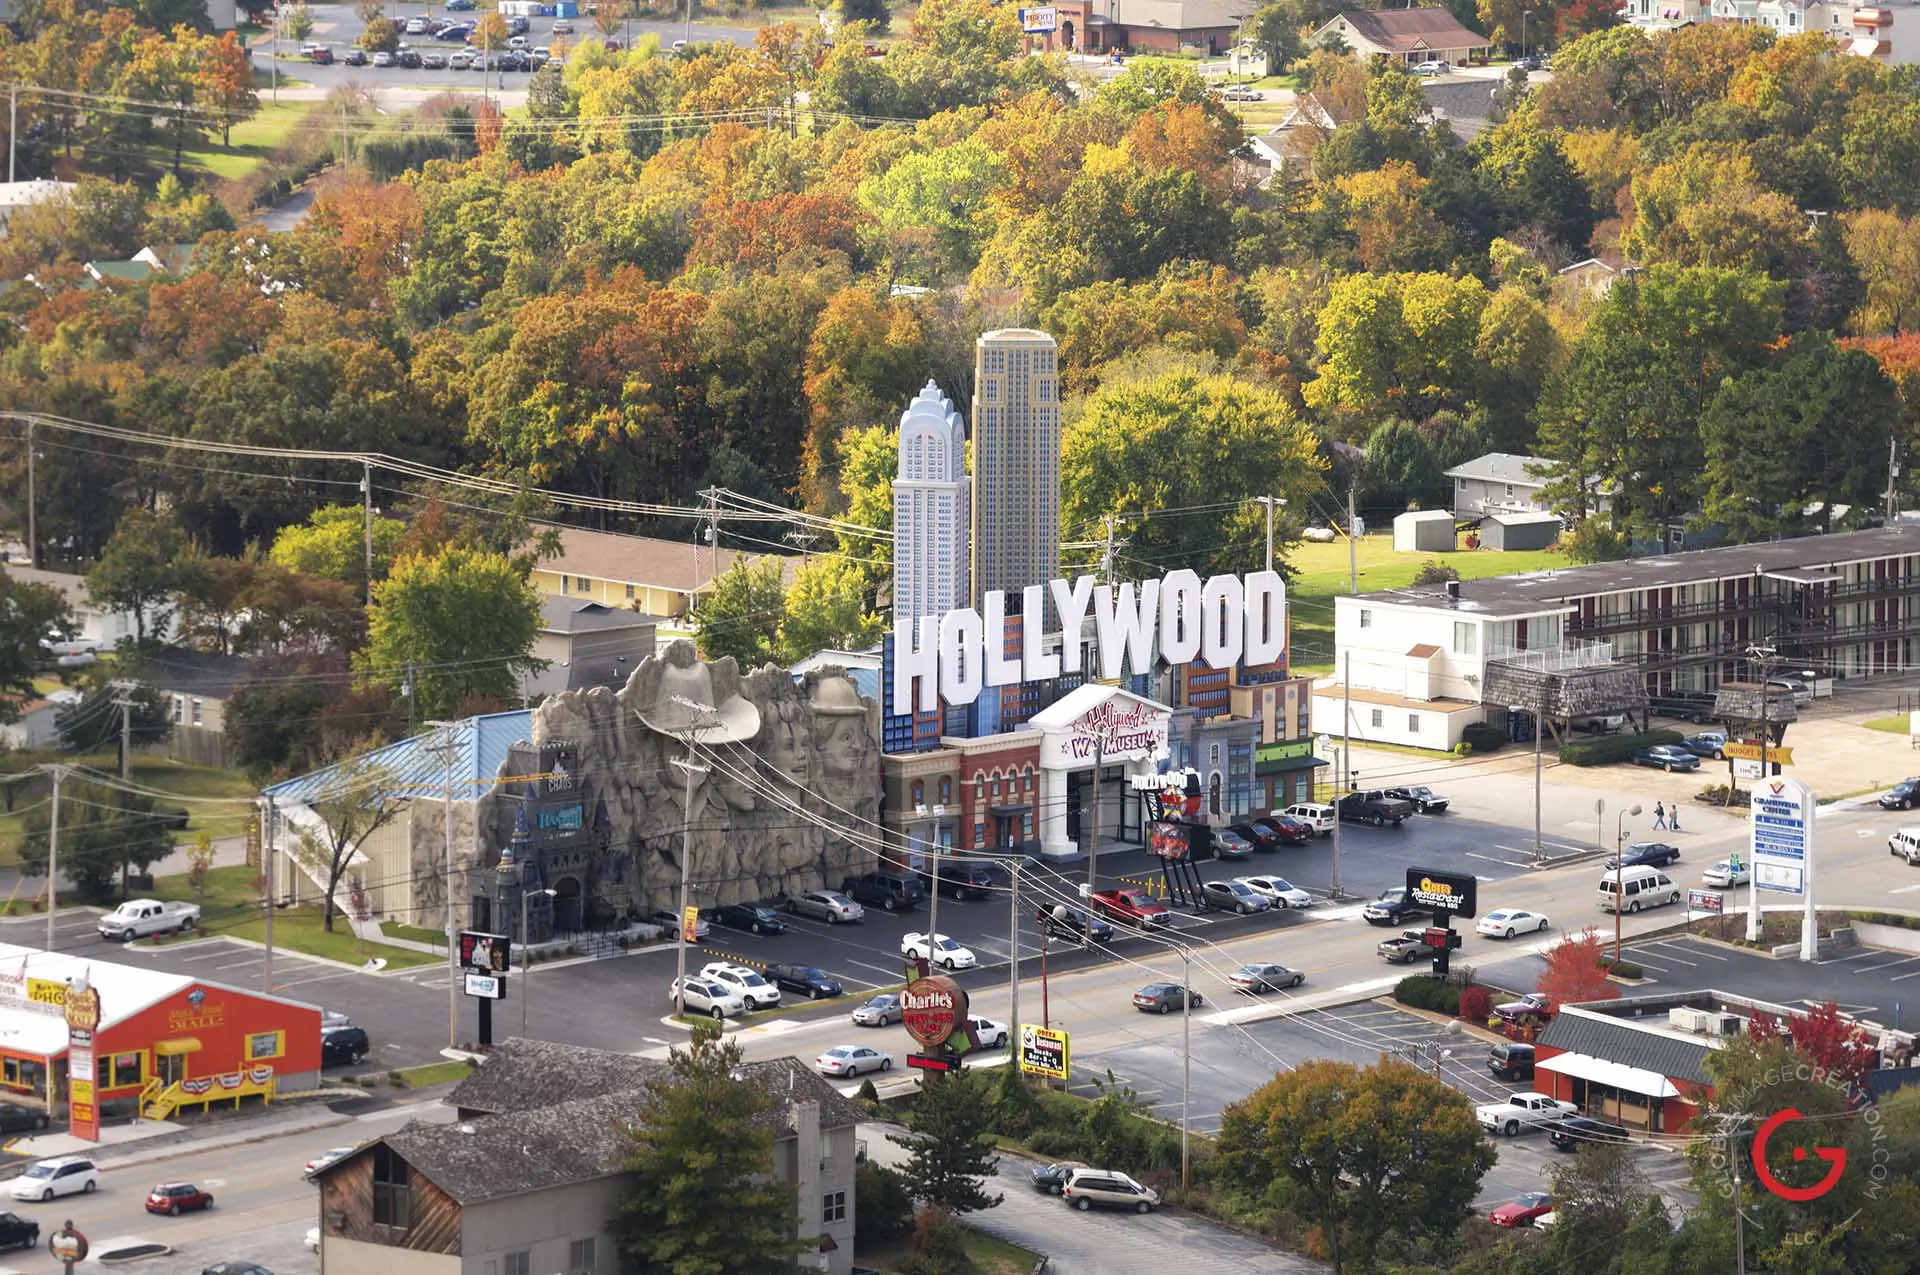 Hollywood wax museum aerial photo on hwy 76 in Branson - Advertising photographers in Branson Missouri, Branson Missouri photography